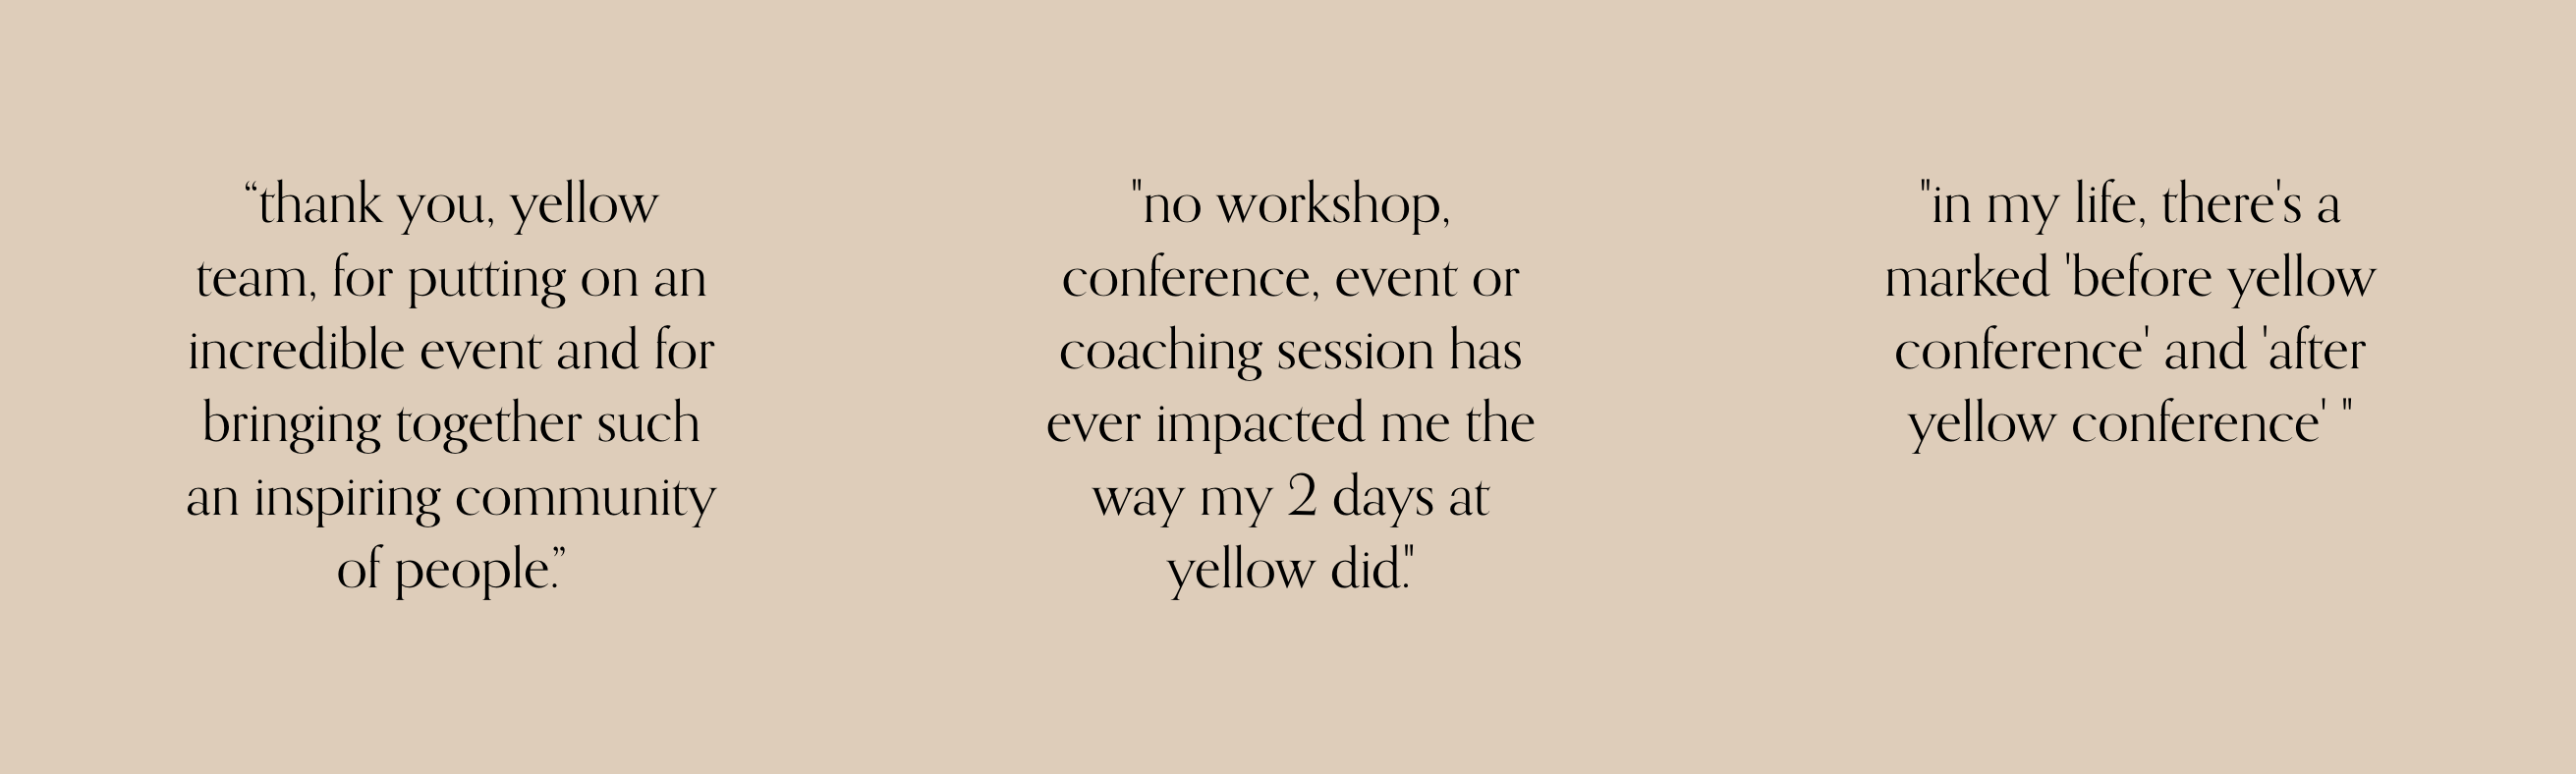 Testimonials from previous Yellow Conferences